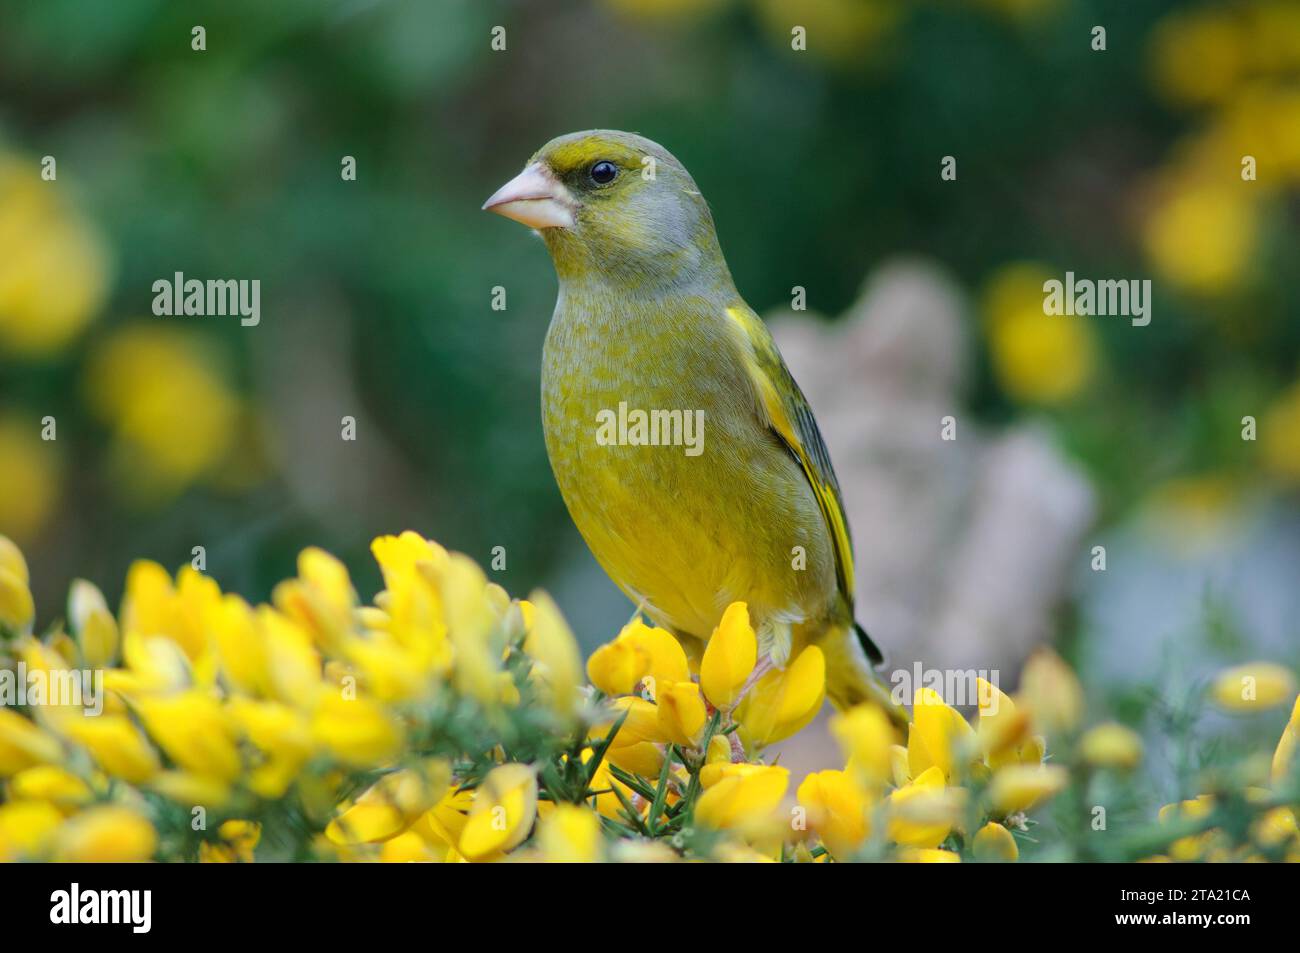 European greenfinch Carduelis chloris, male perched on flowering gorse bush, County Durham, England, UK, April. Stock Photo